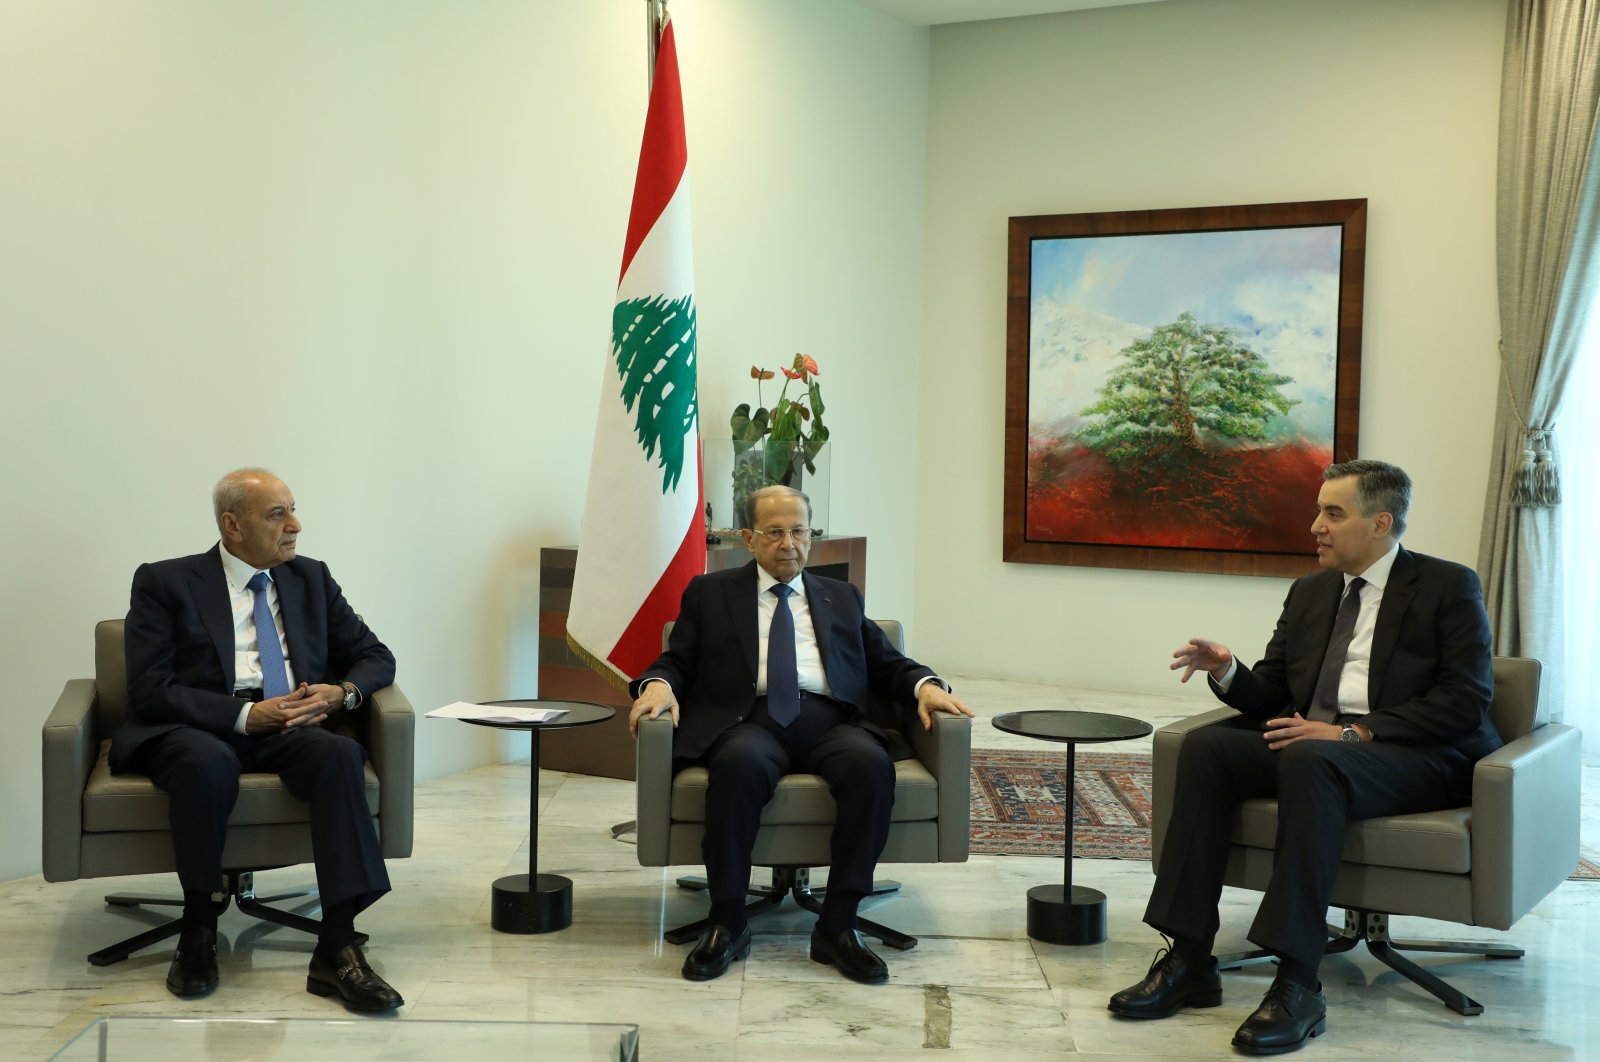 Designated Prime Minister Mustapha Adib, meets with Lebanon's President Michel Aoun and Lebanese Speaker of the Parliament Nabih Berri at the presidential palace in Baabda, Lebanon Aug. 31, 2020. (Reuters Photo)